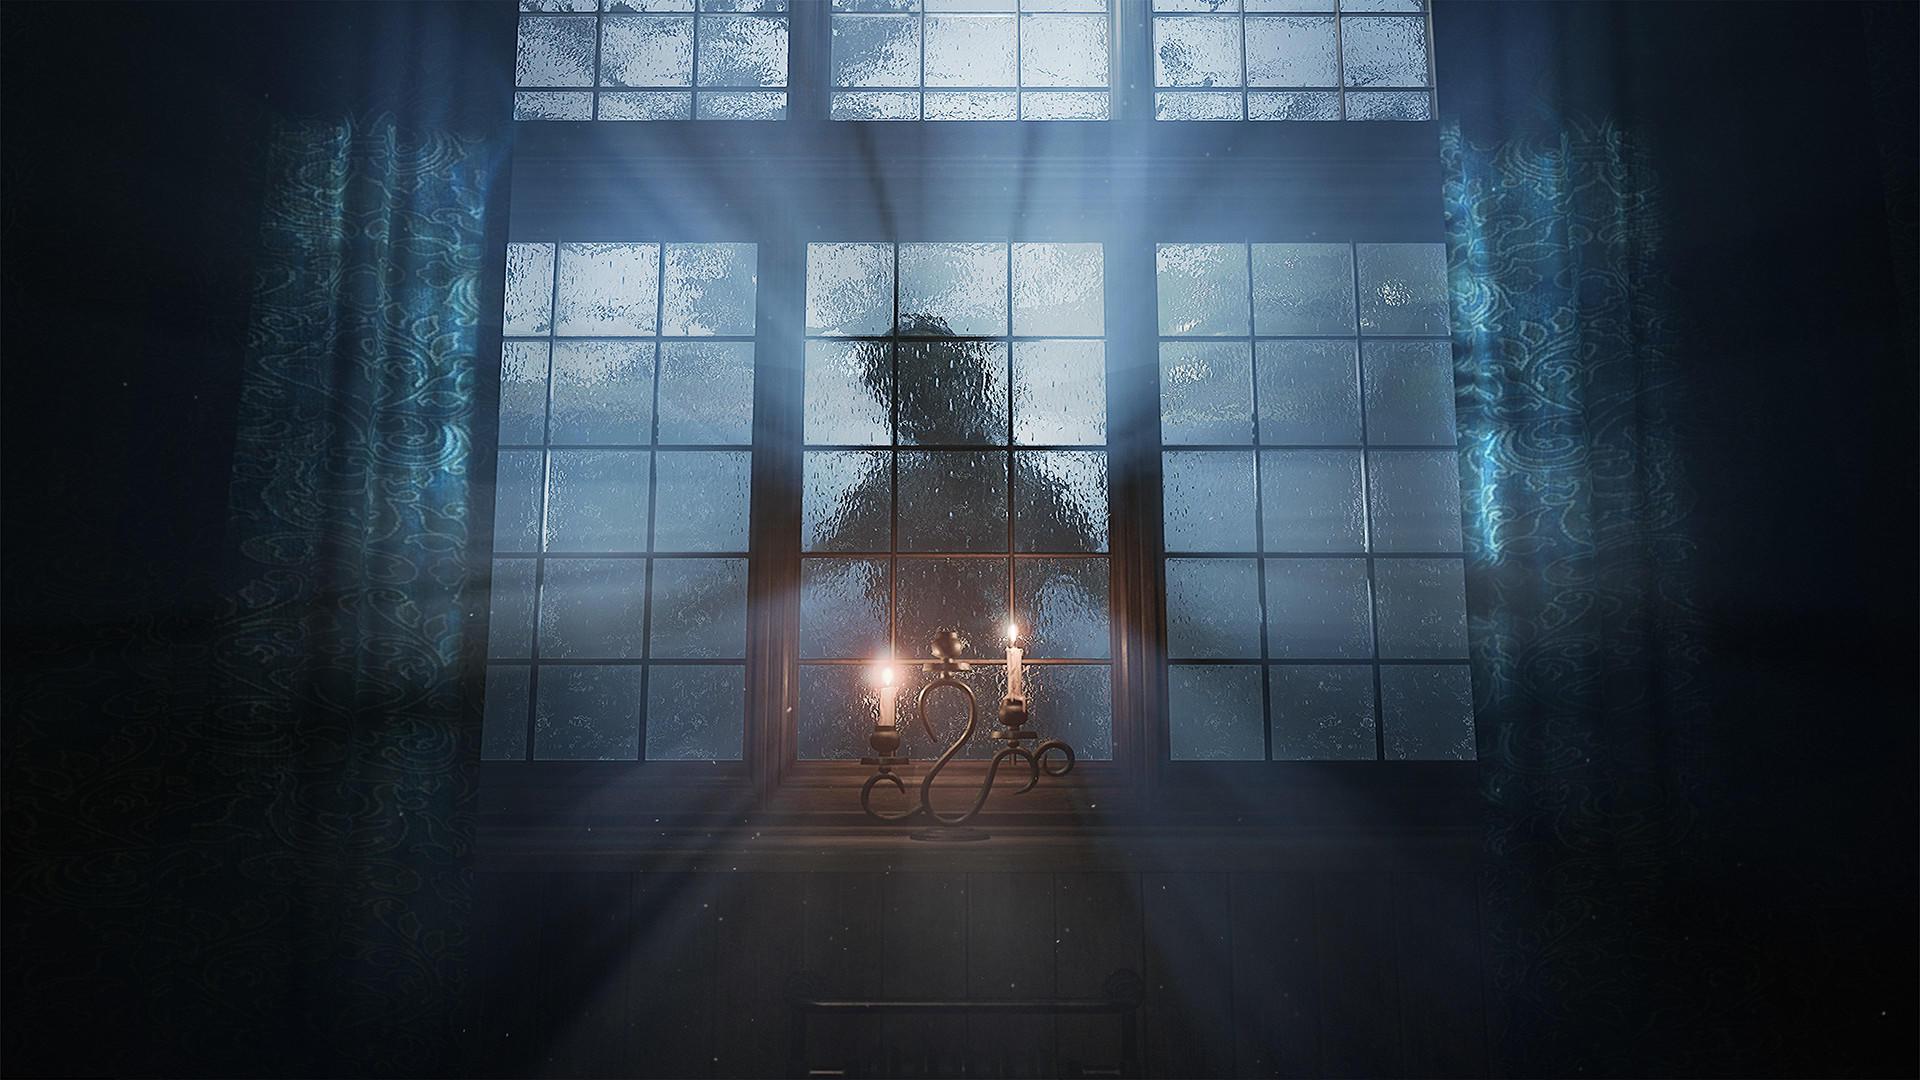 Layers of Fear screenshot game